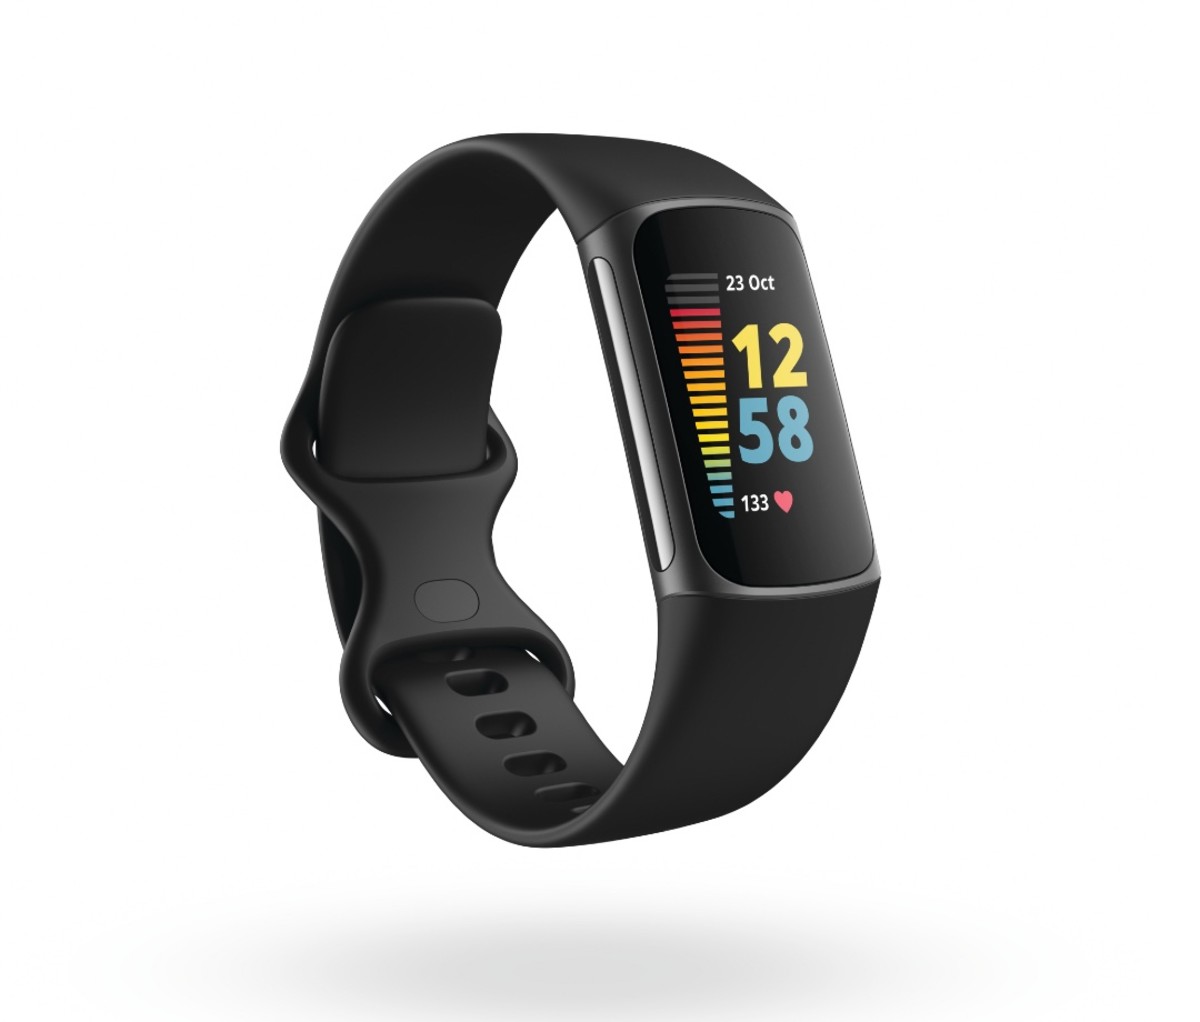 Fitbit's new Charge 5 health and fitness tracker offers a sleeker design and more features.